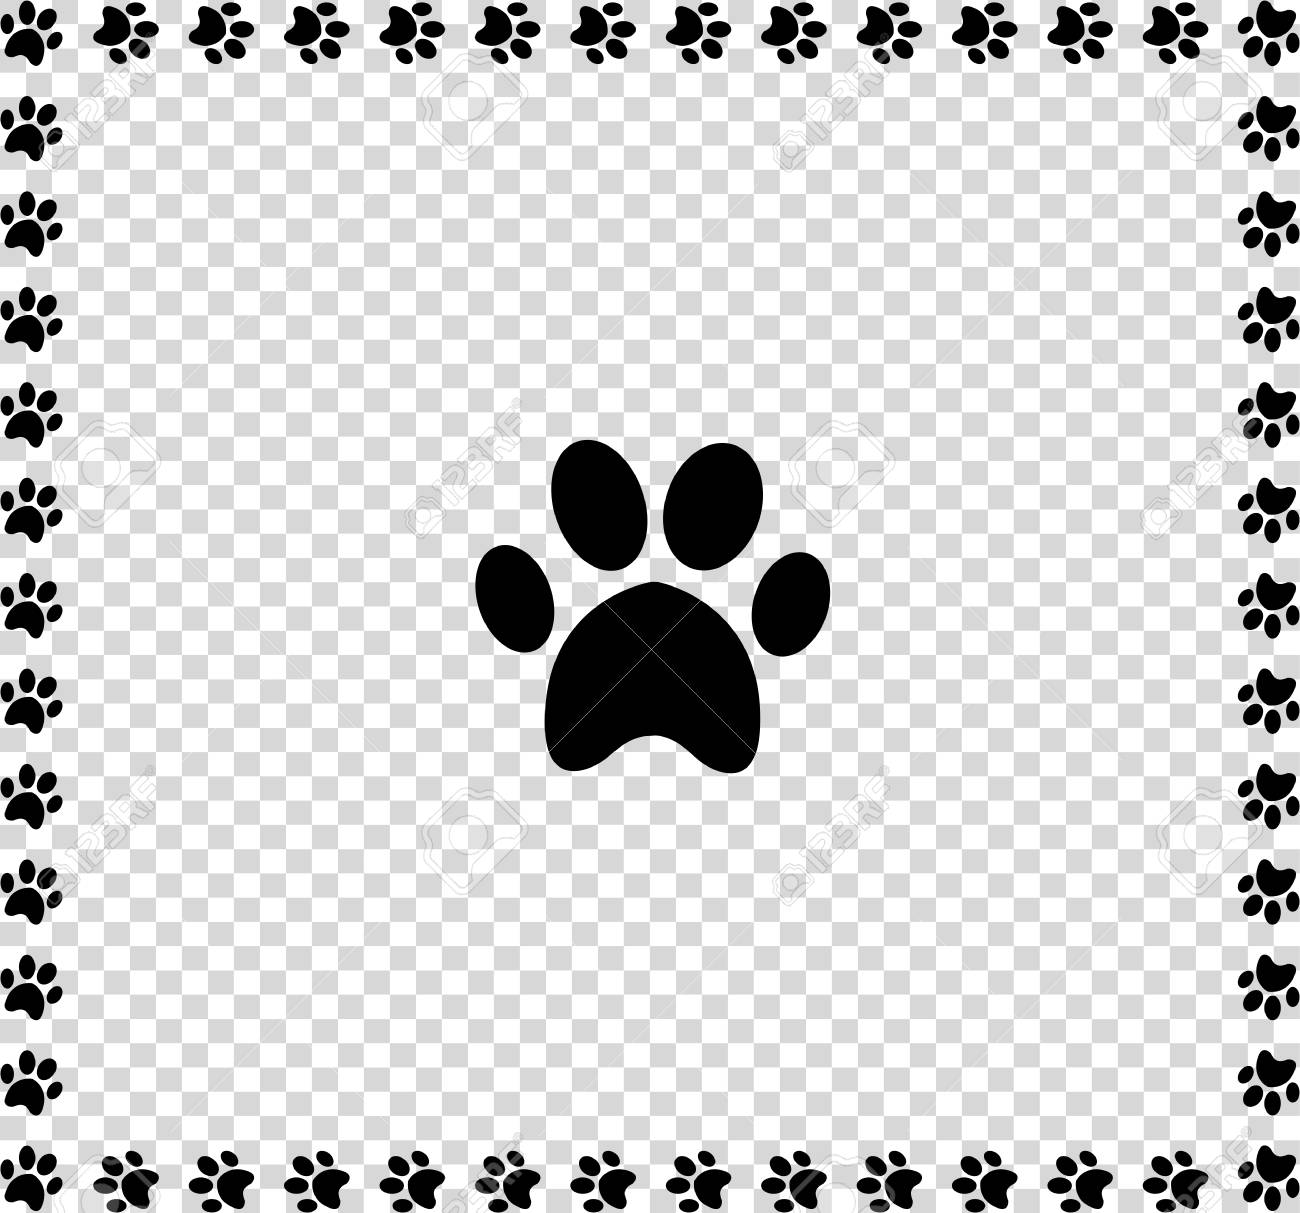 Black Animal S Paw Print Icon Framed With Paws Square Border